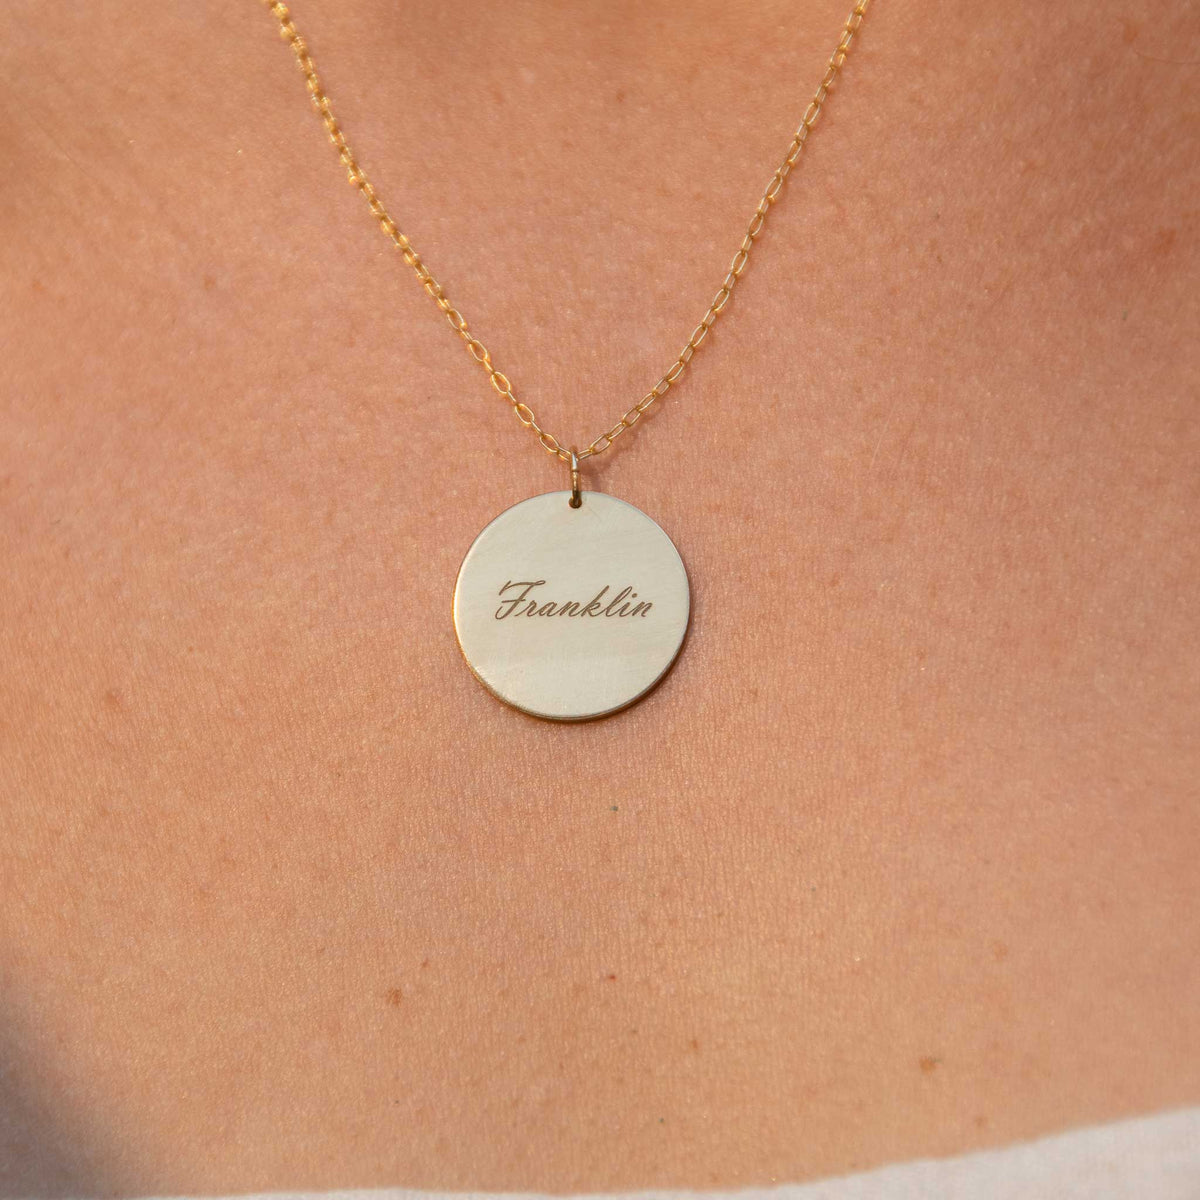 A close up of the Franklin engraved pendant being worn.